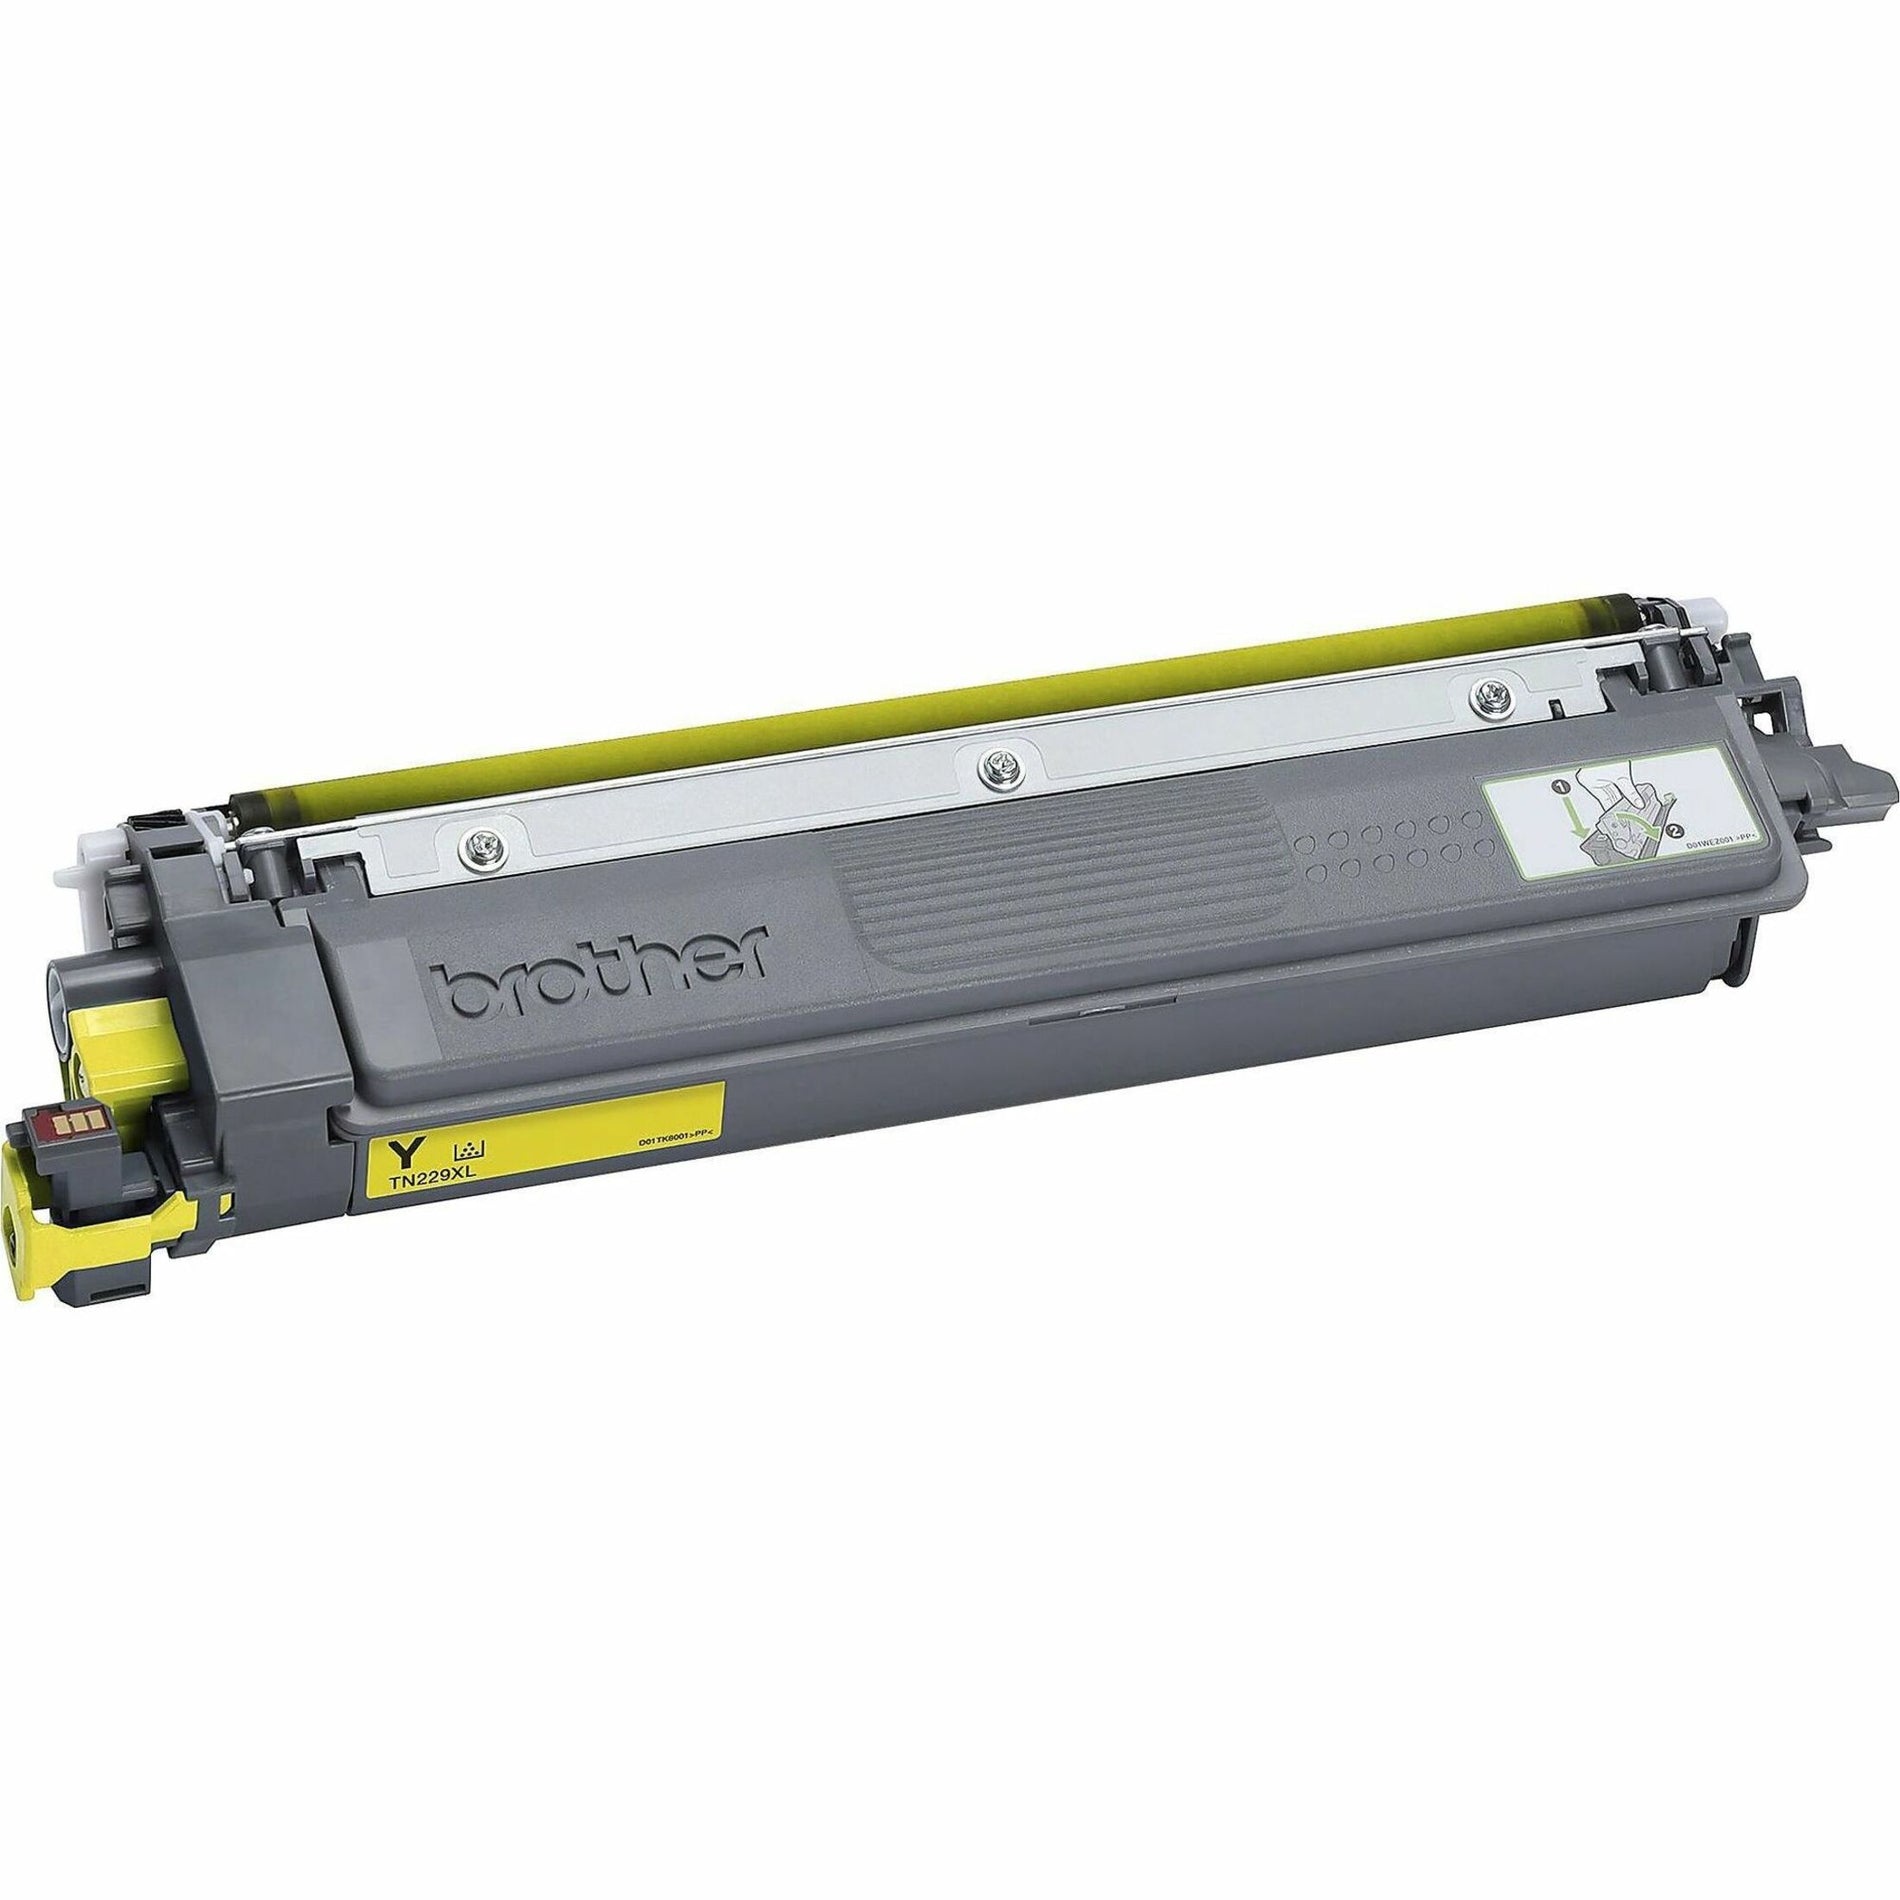 Brother TN229XLY High-yield Yellow Toner Cartridge - Genuine Brother Cartridge for HL-L3220CDW, HL-L3280CDW, and More